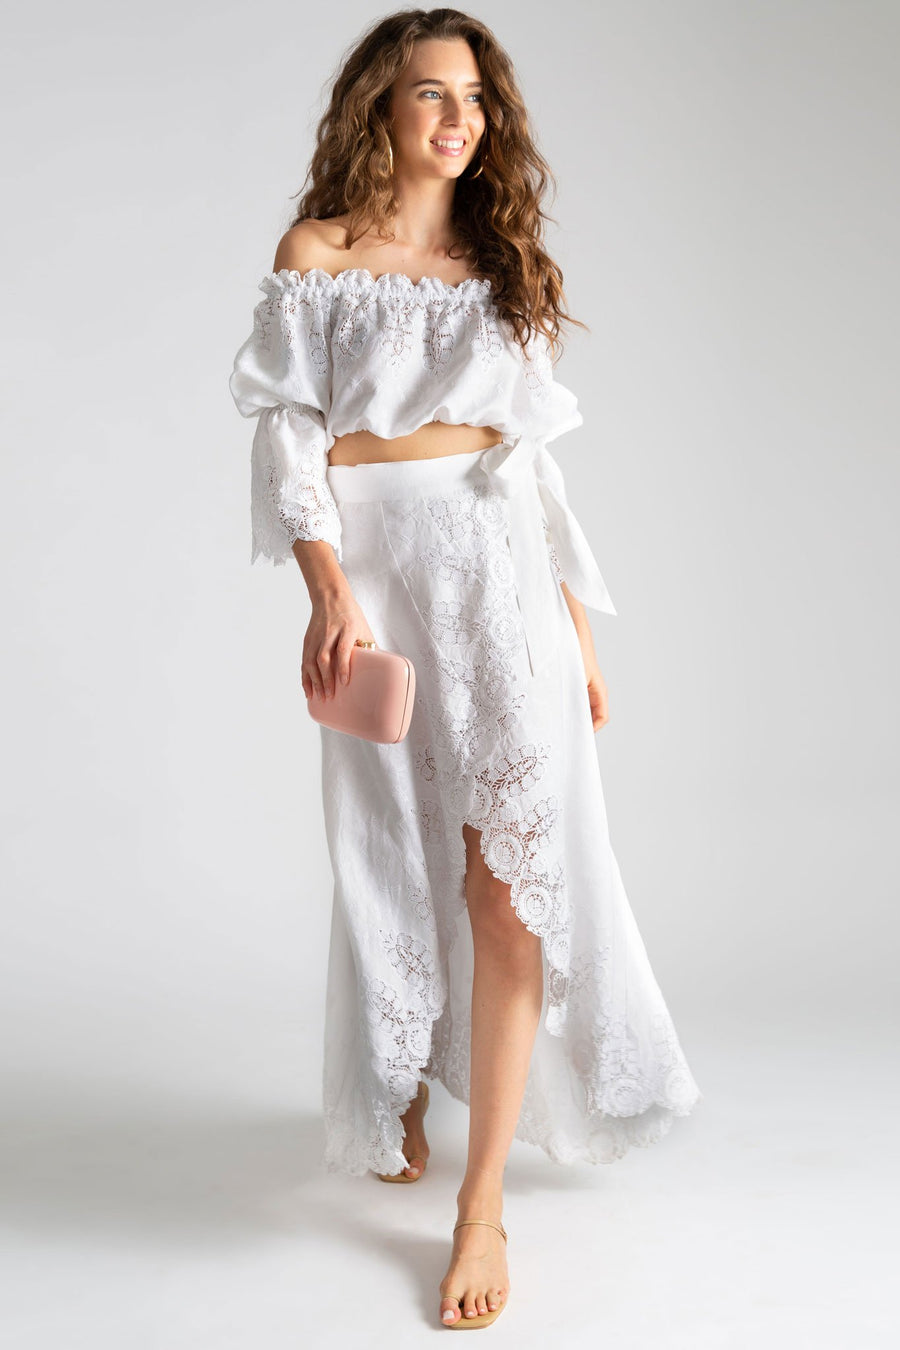 This is a photo of a woman wearing a white linen and lace outfit with maxi wrap skirt open in the front and off the shoulder top with peasant sleeves. She holds a light pink clutch and styles the look with nude sandals.